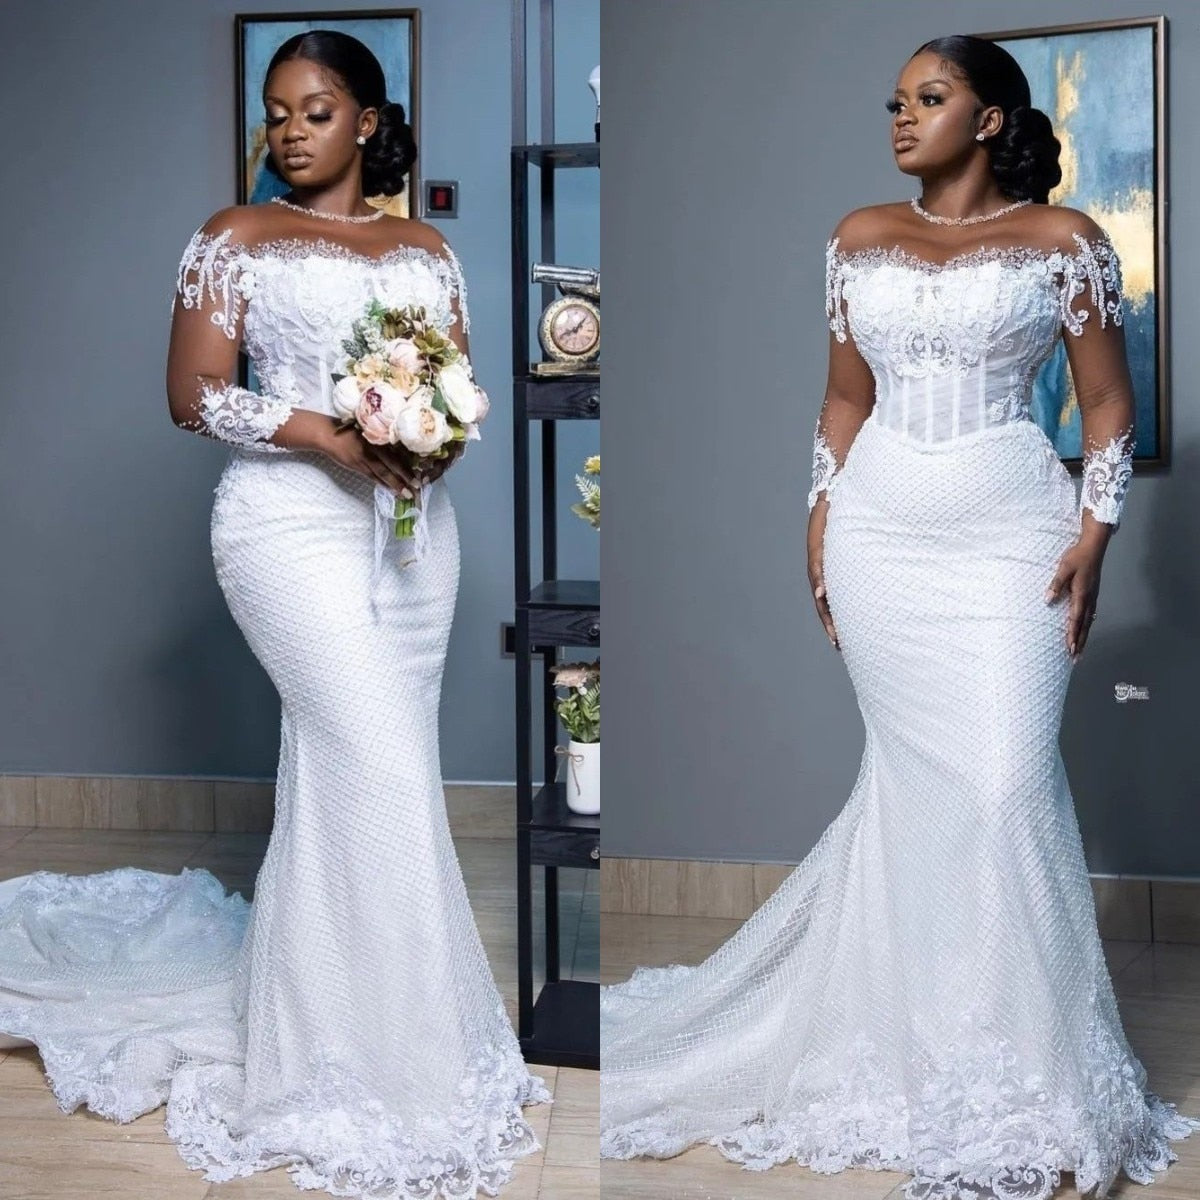 African White Mermaid Wedding Dresses Women Elegant Sheer Long Sleeved Bridal Gowns Lace Country Dress Second Reception Gown